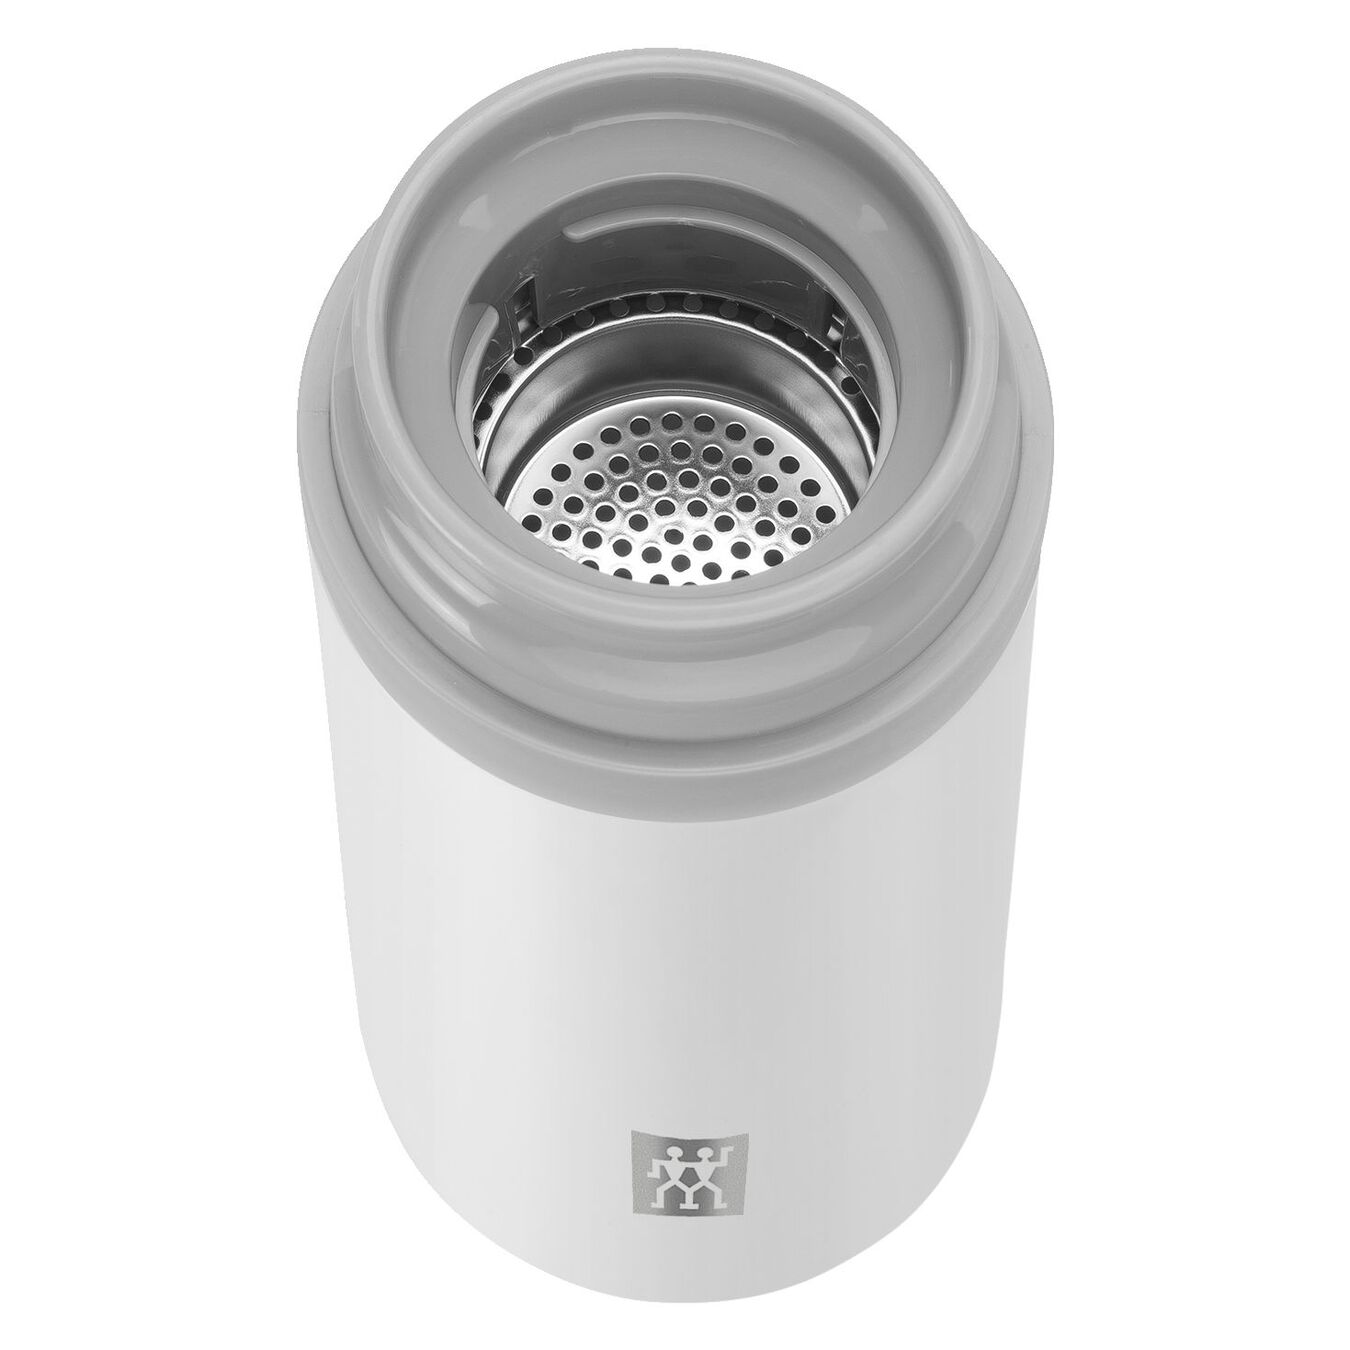 Thermo flask, 420 ml | stainless steel | white-grey,,large 2